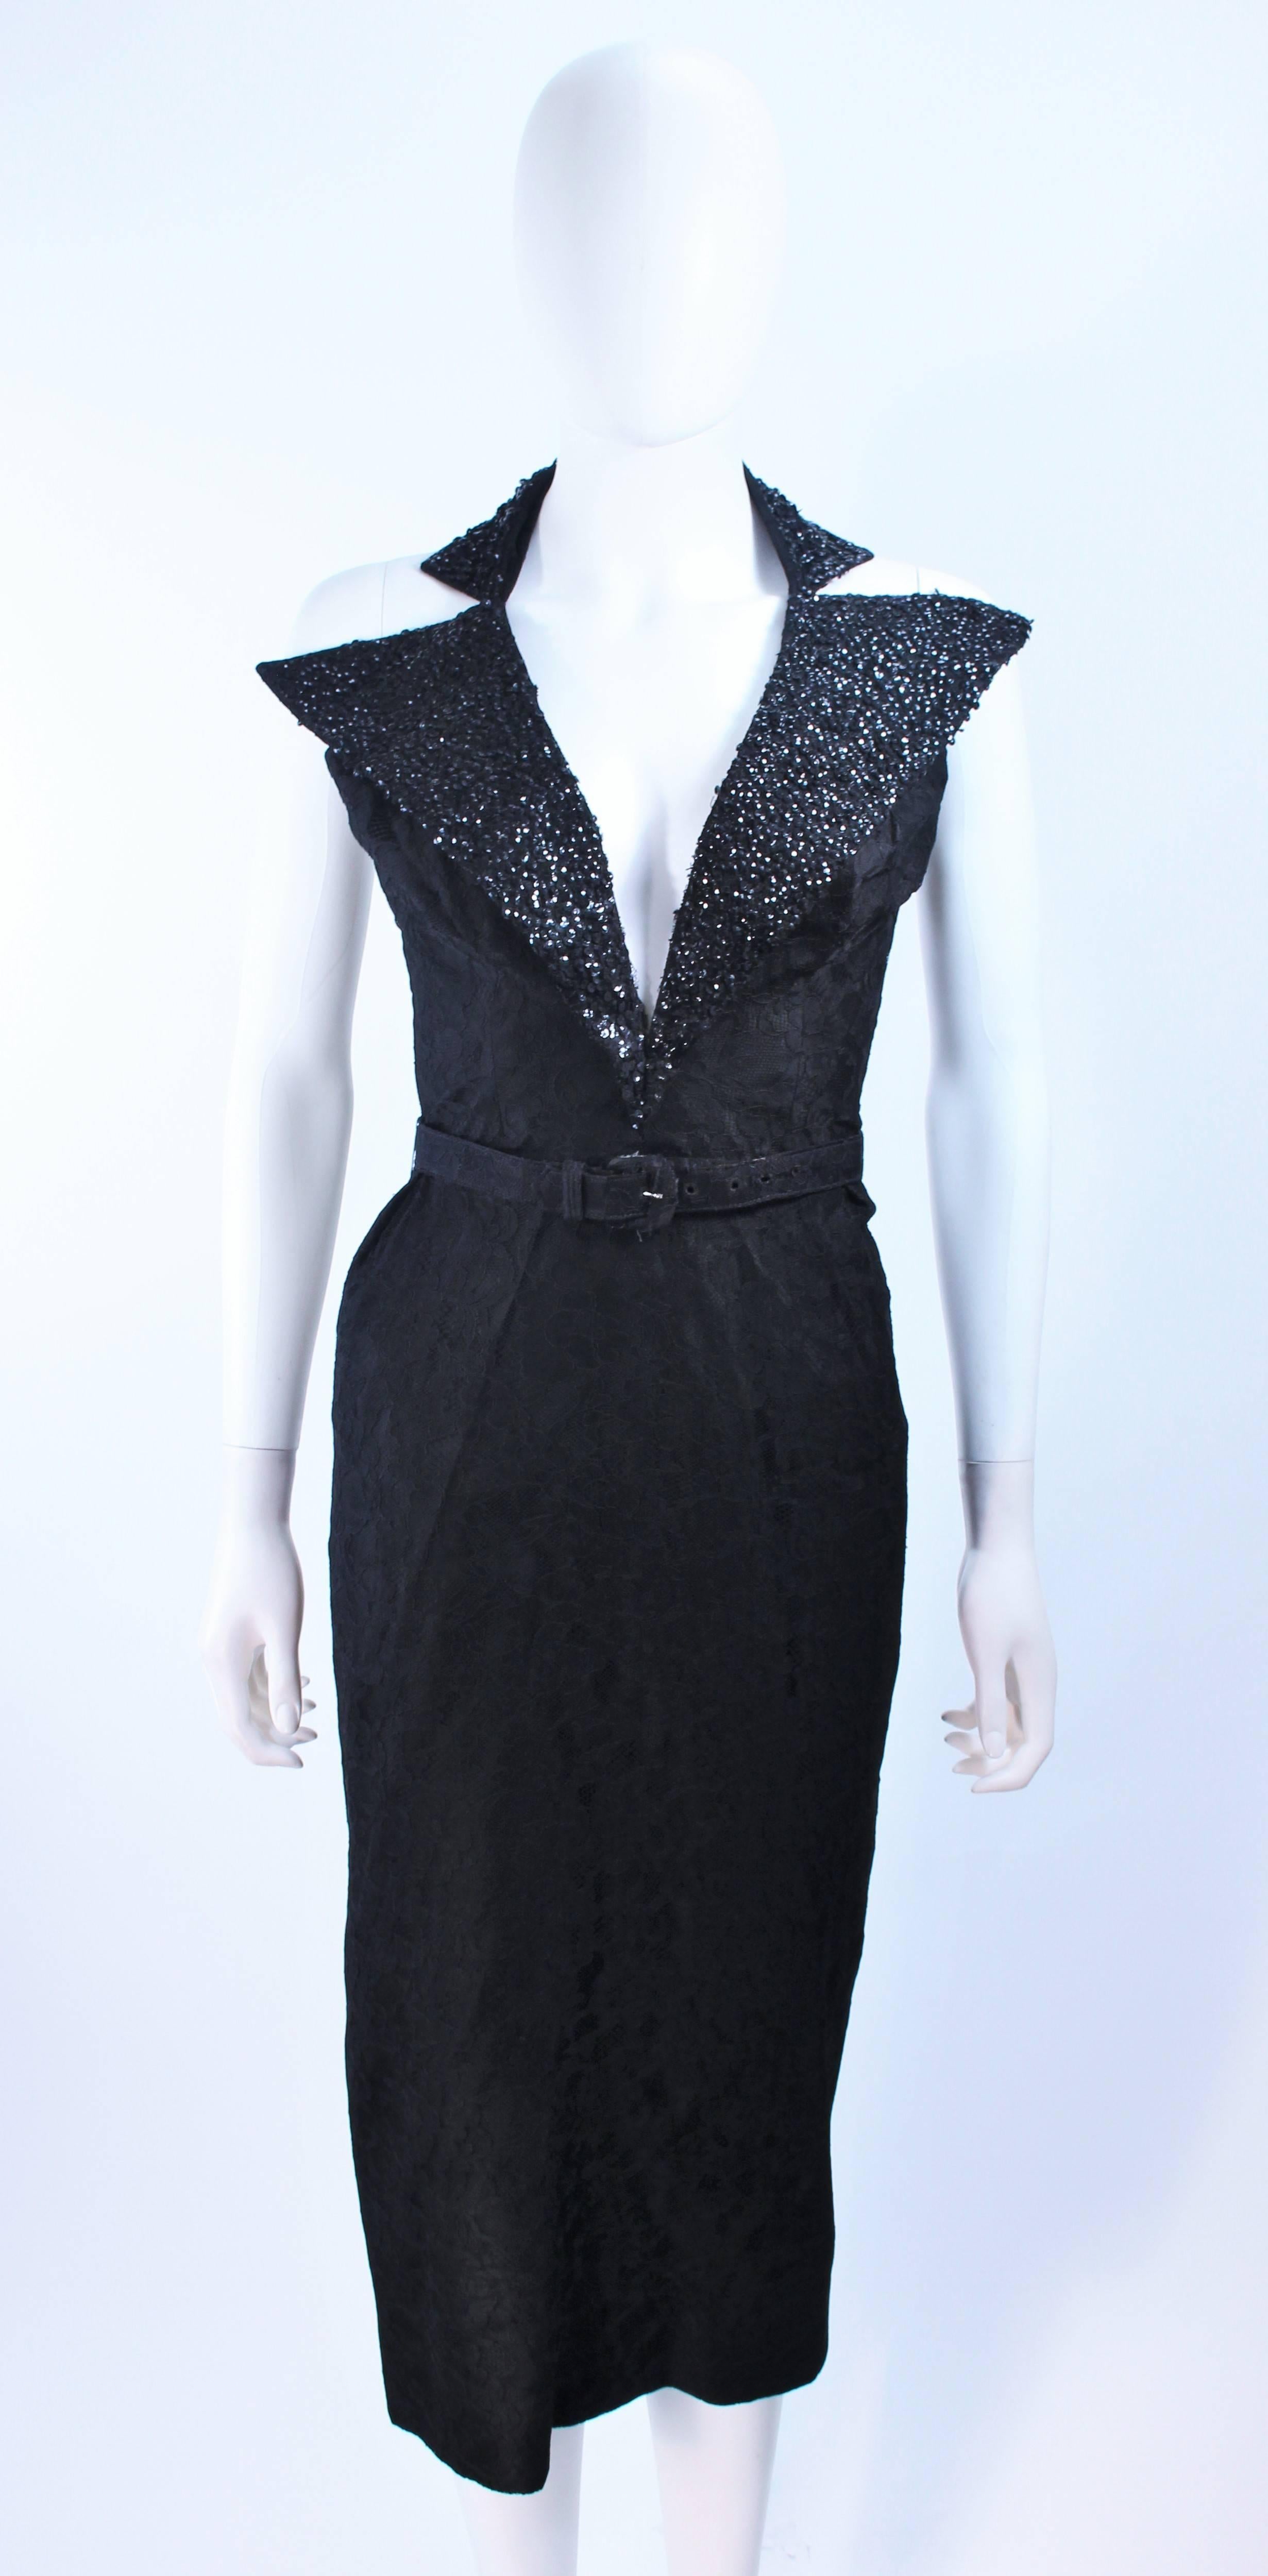 MIGUEL by Kenneth Johnson 1950's  Black Lace Cocktail Dress Sequin Collar Size 0 In Excellent Condition For Sale In Los Angeles, CA